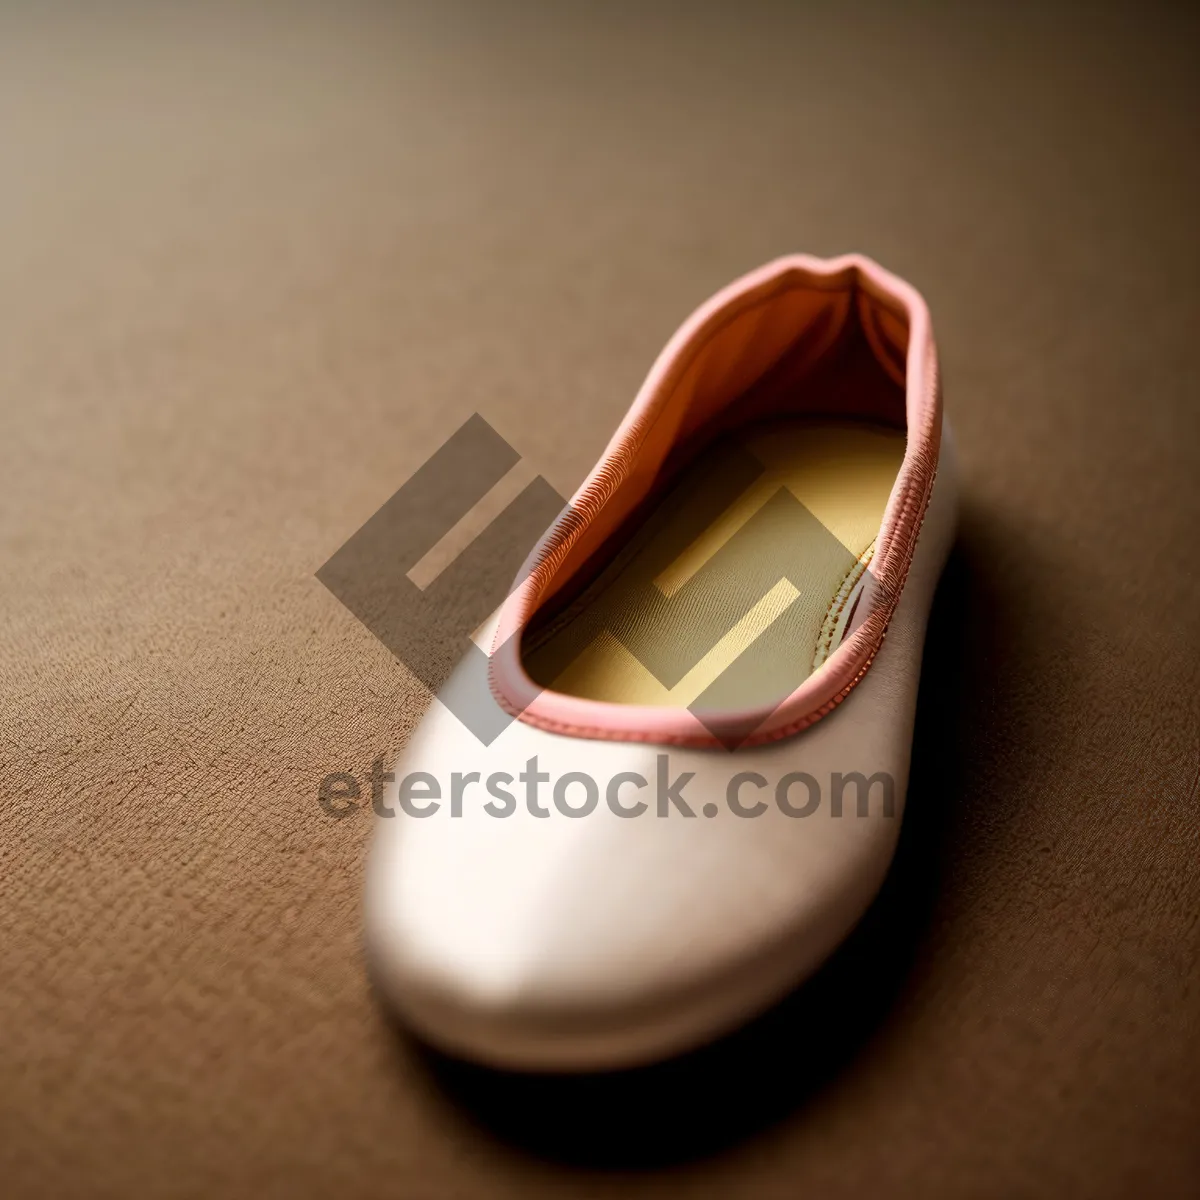 Picture of Mouse Sandal on Parquet